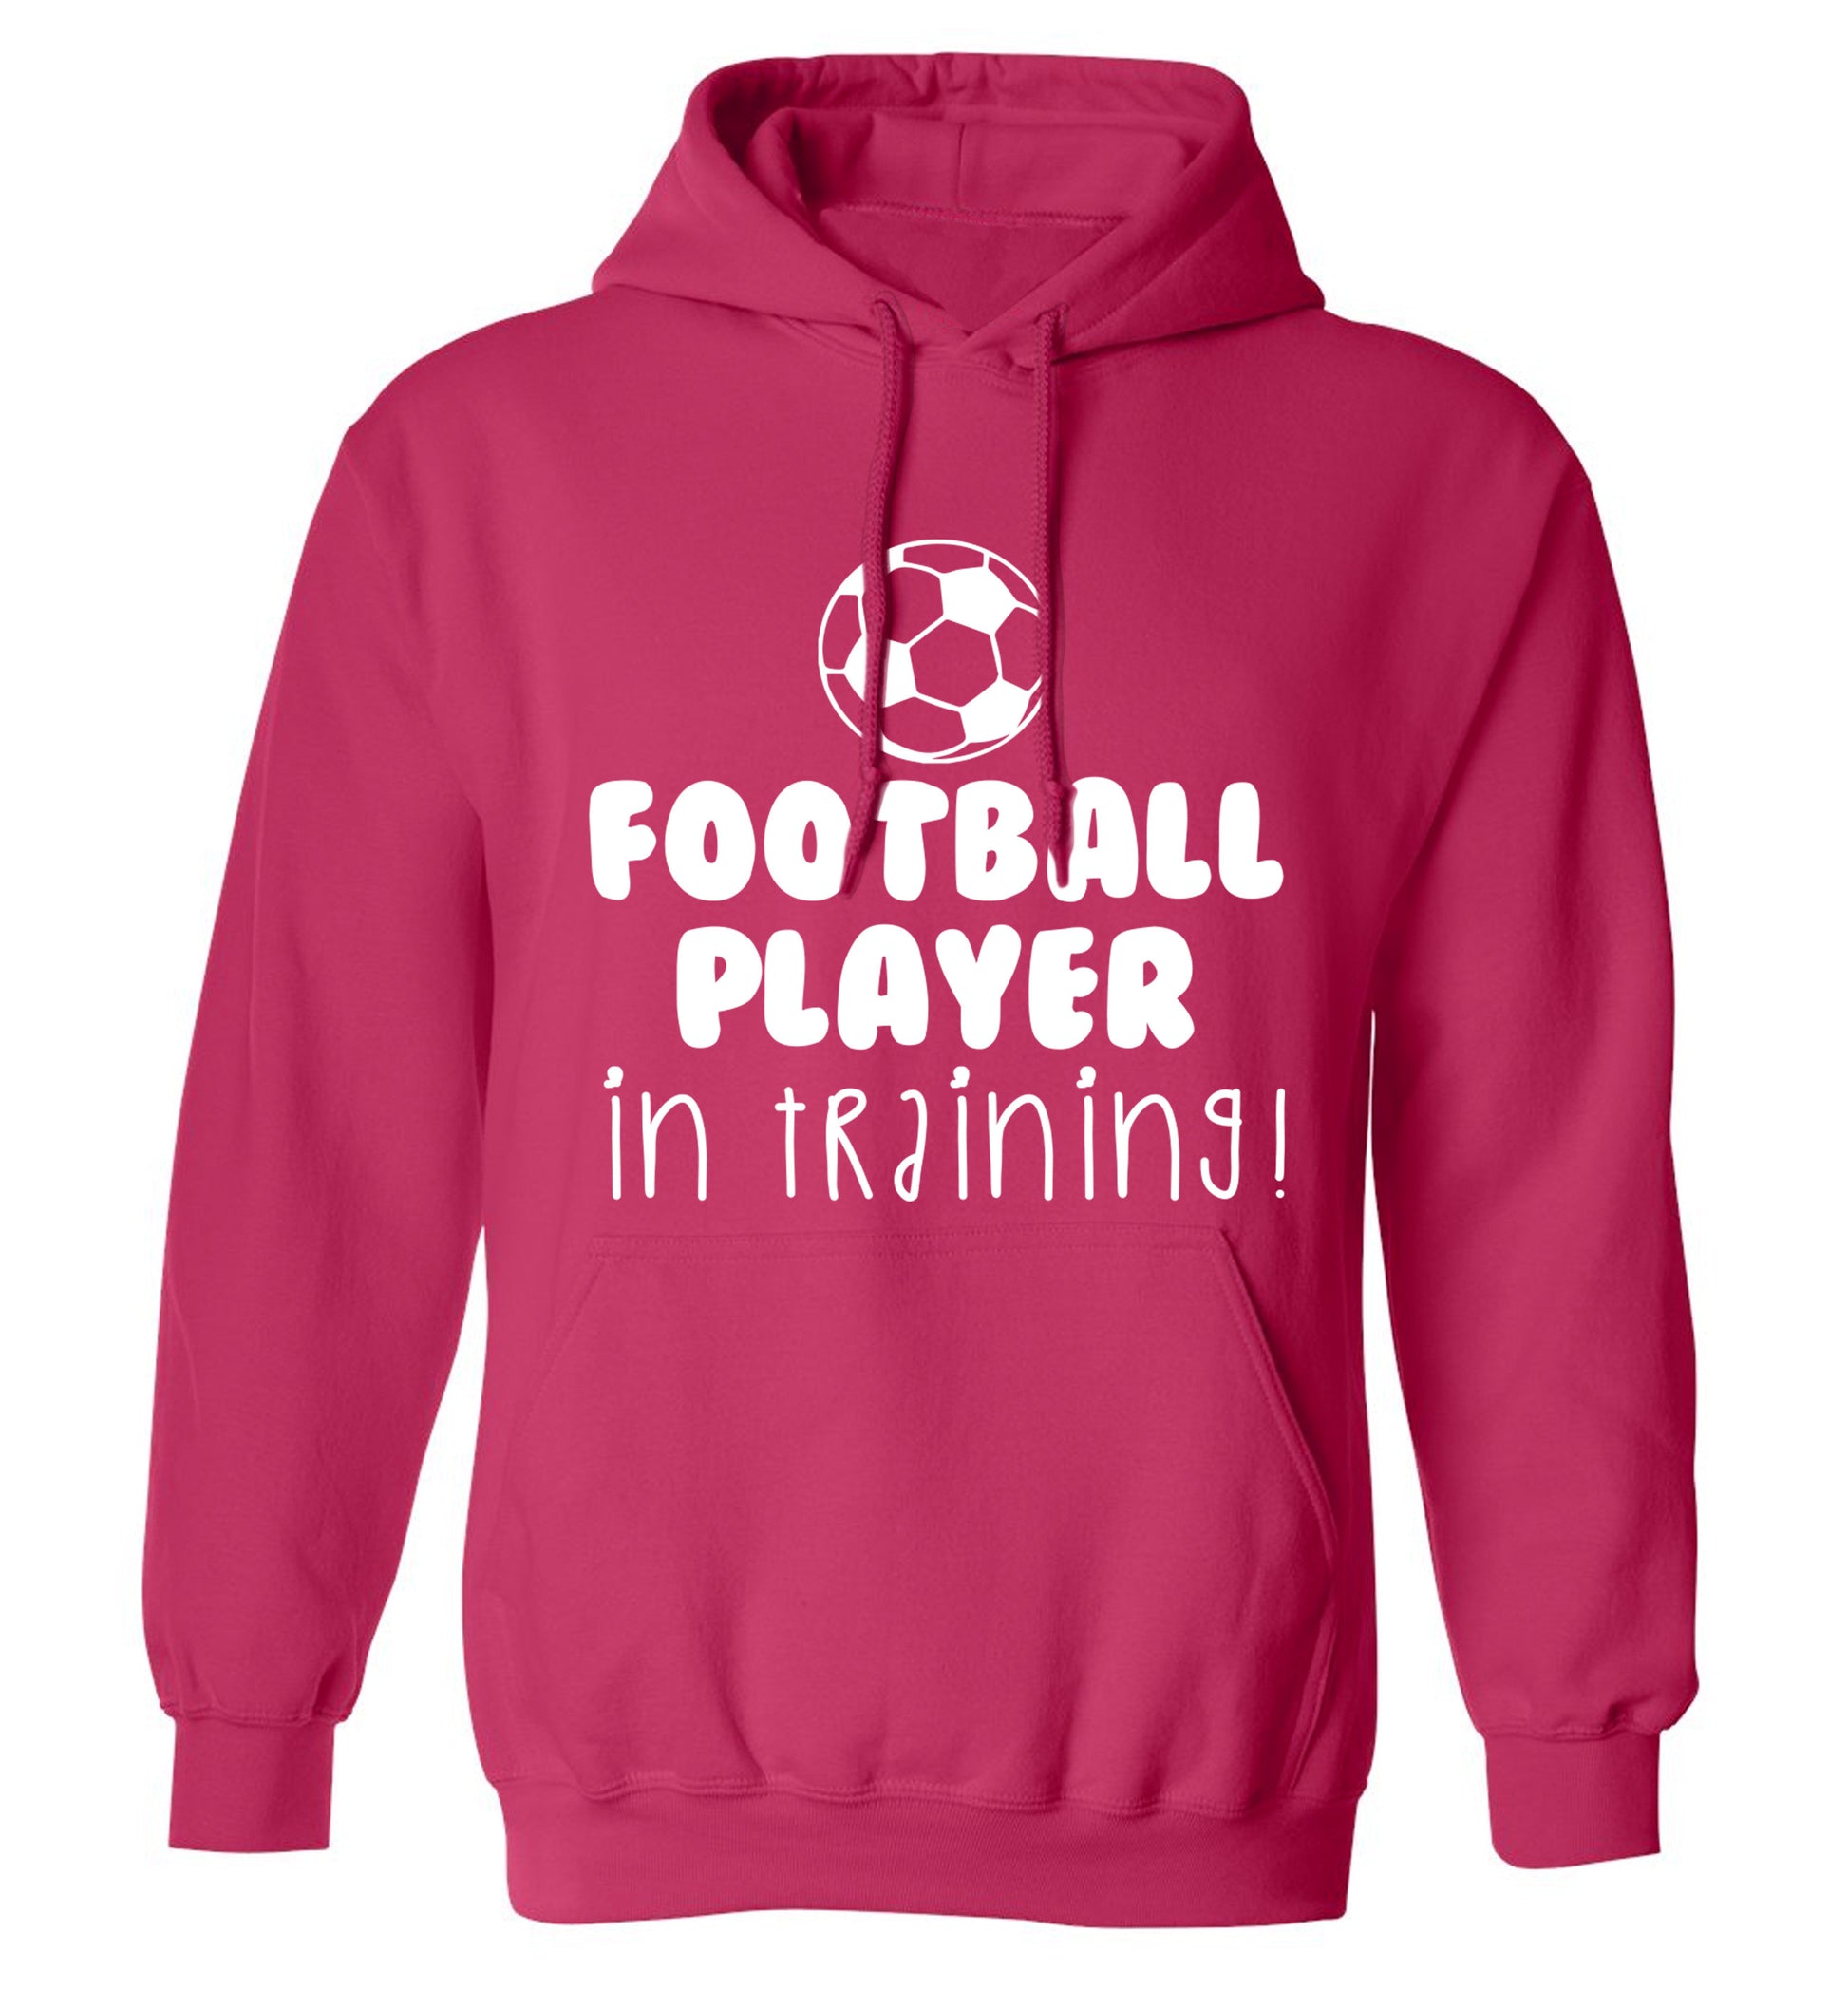 Football player in training adults unisex pink hoodie 2XL